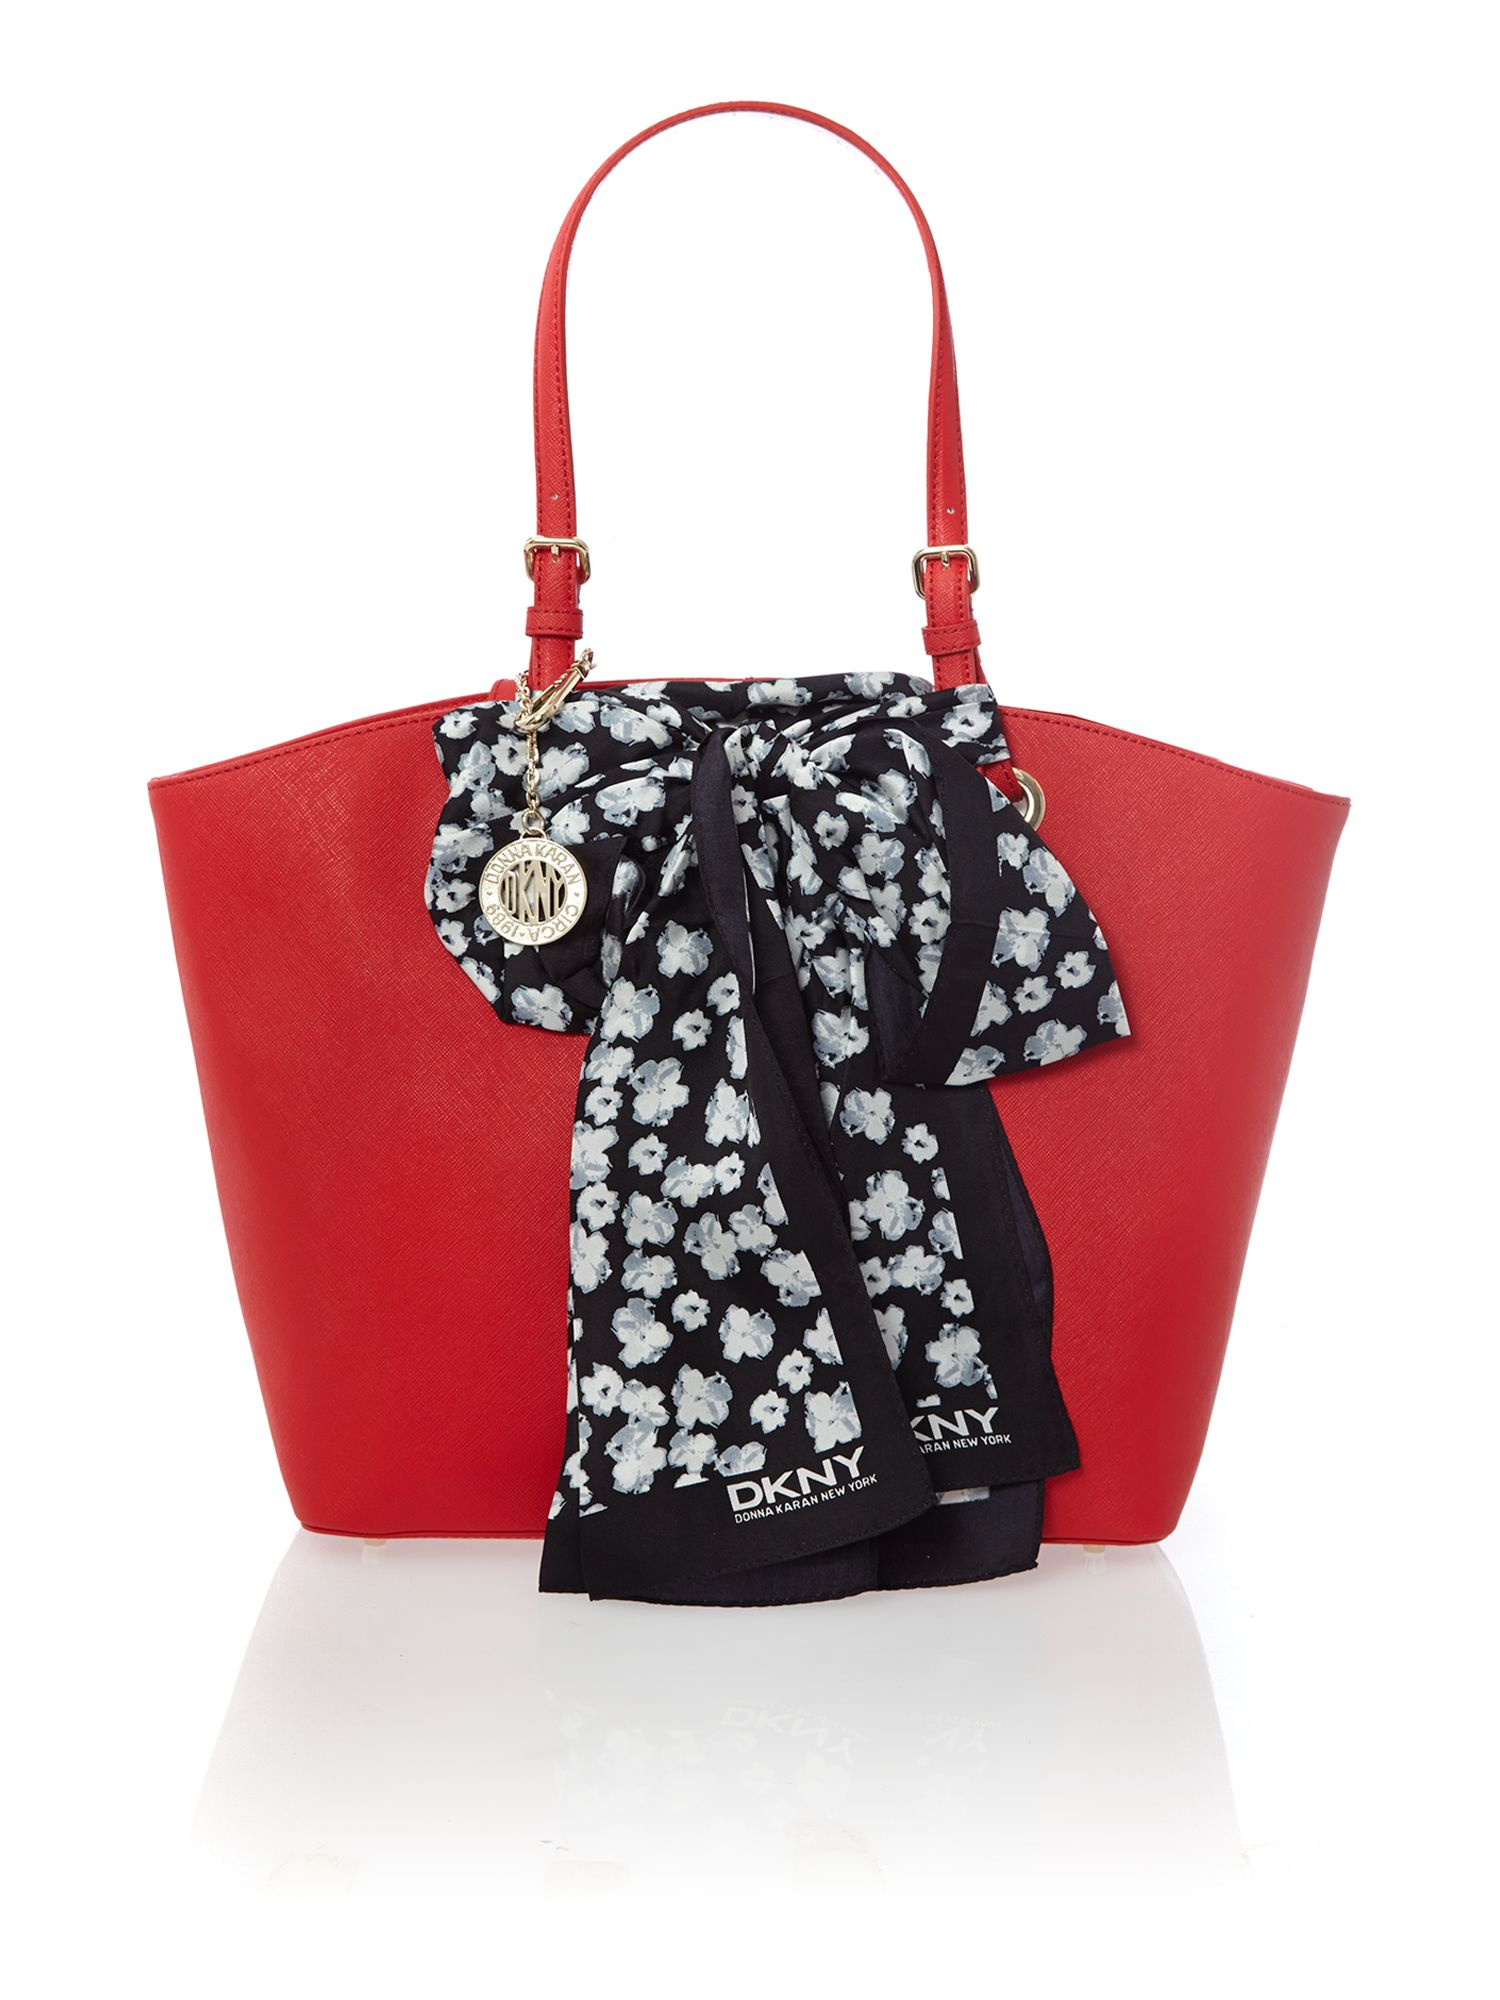 Lyst - Dkny Red Large Scarf Tote Bag in Red